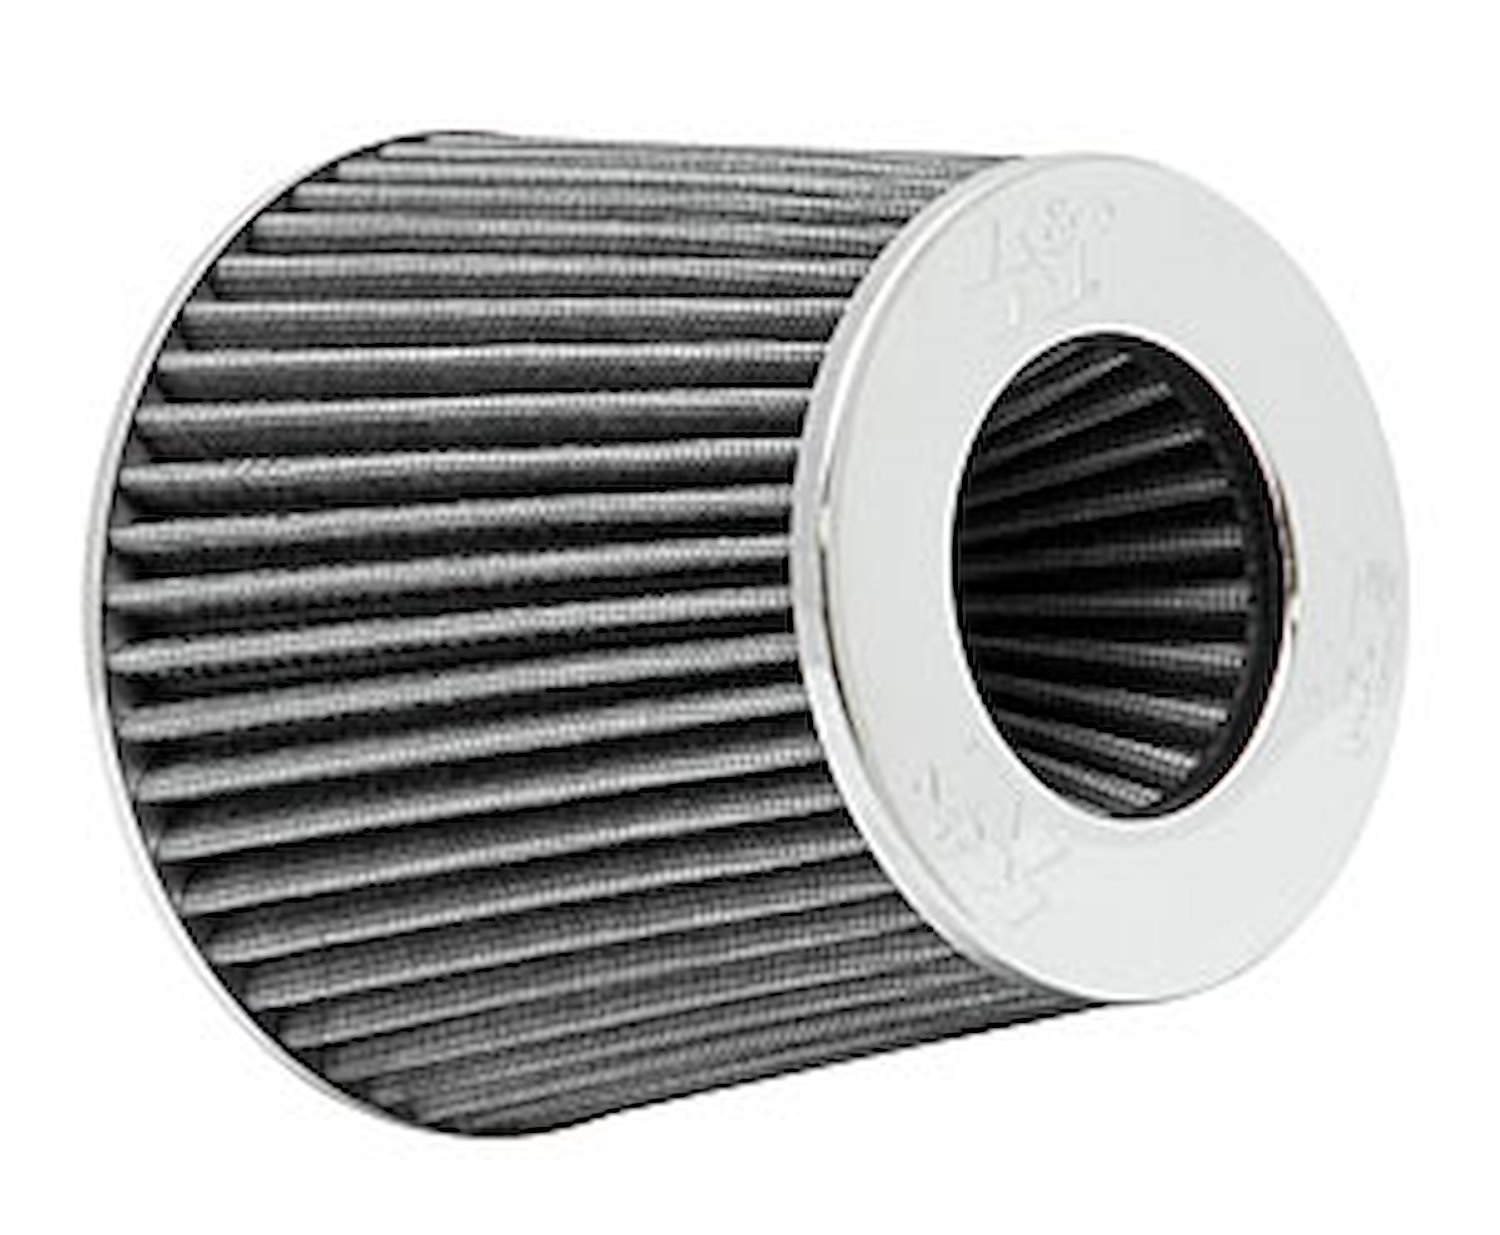 Tapered Filter Flange Dia.- F: 4", 102 mm